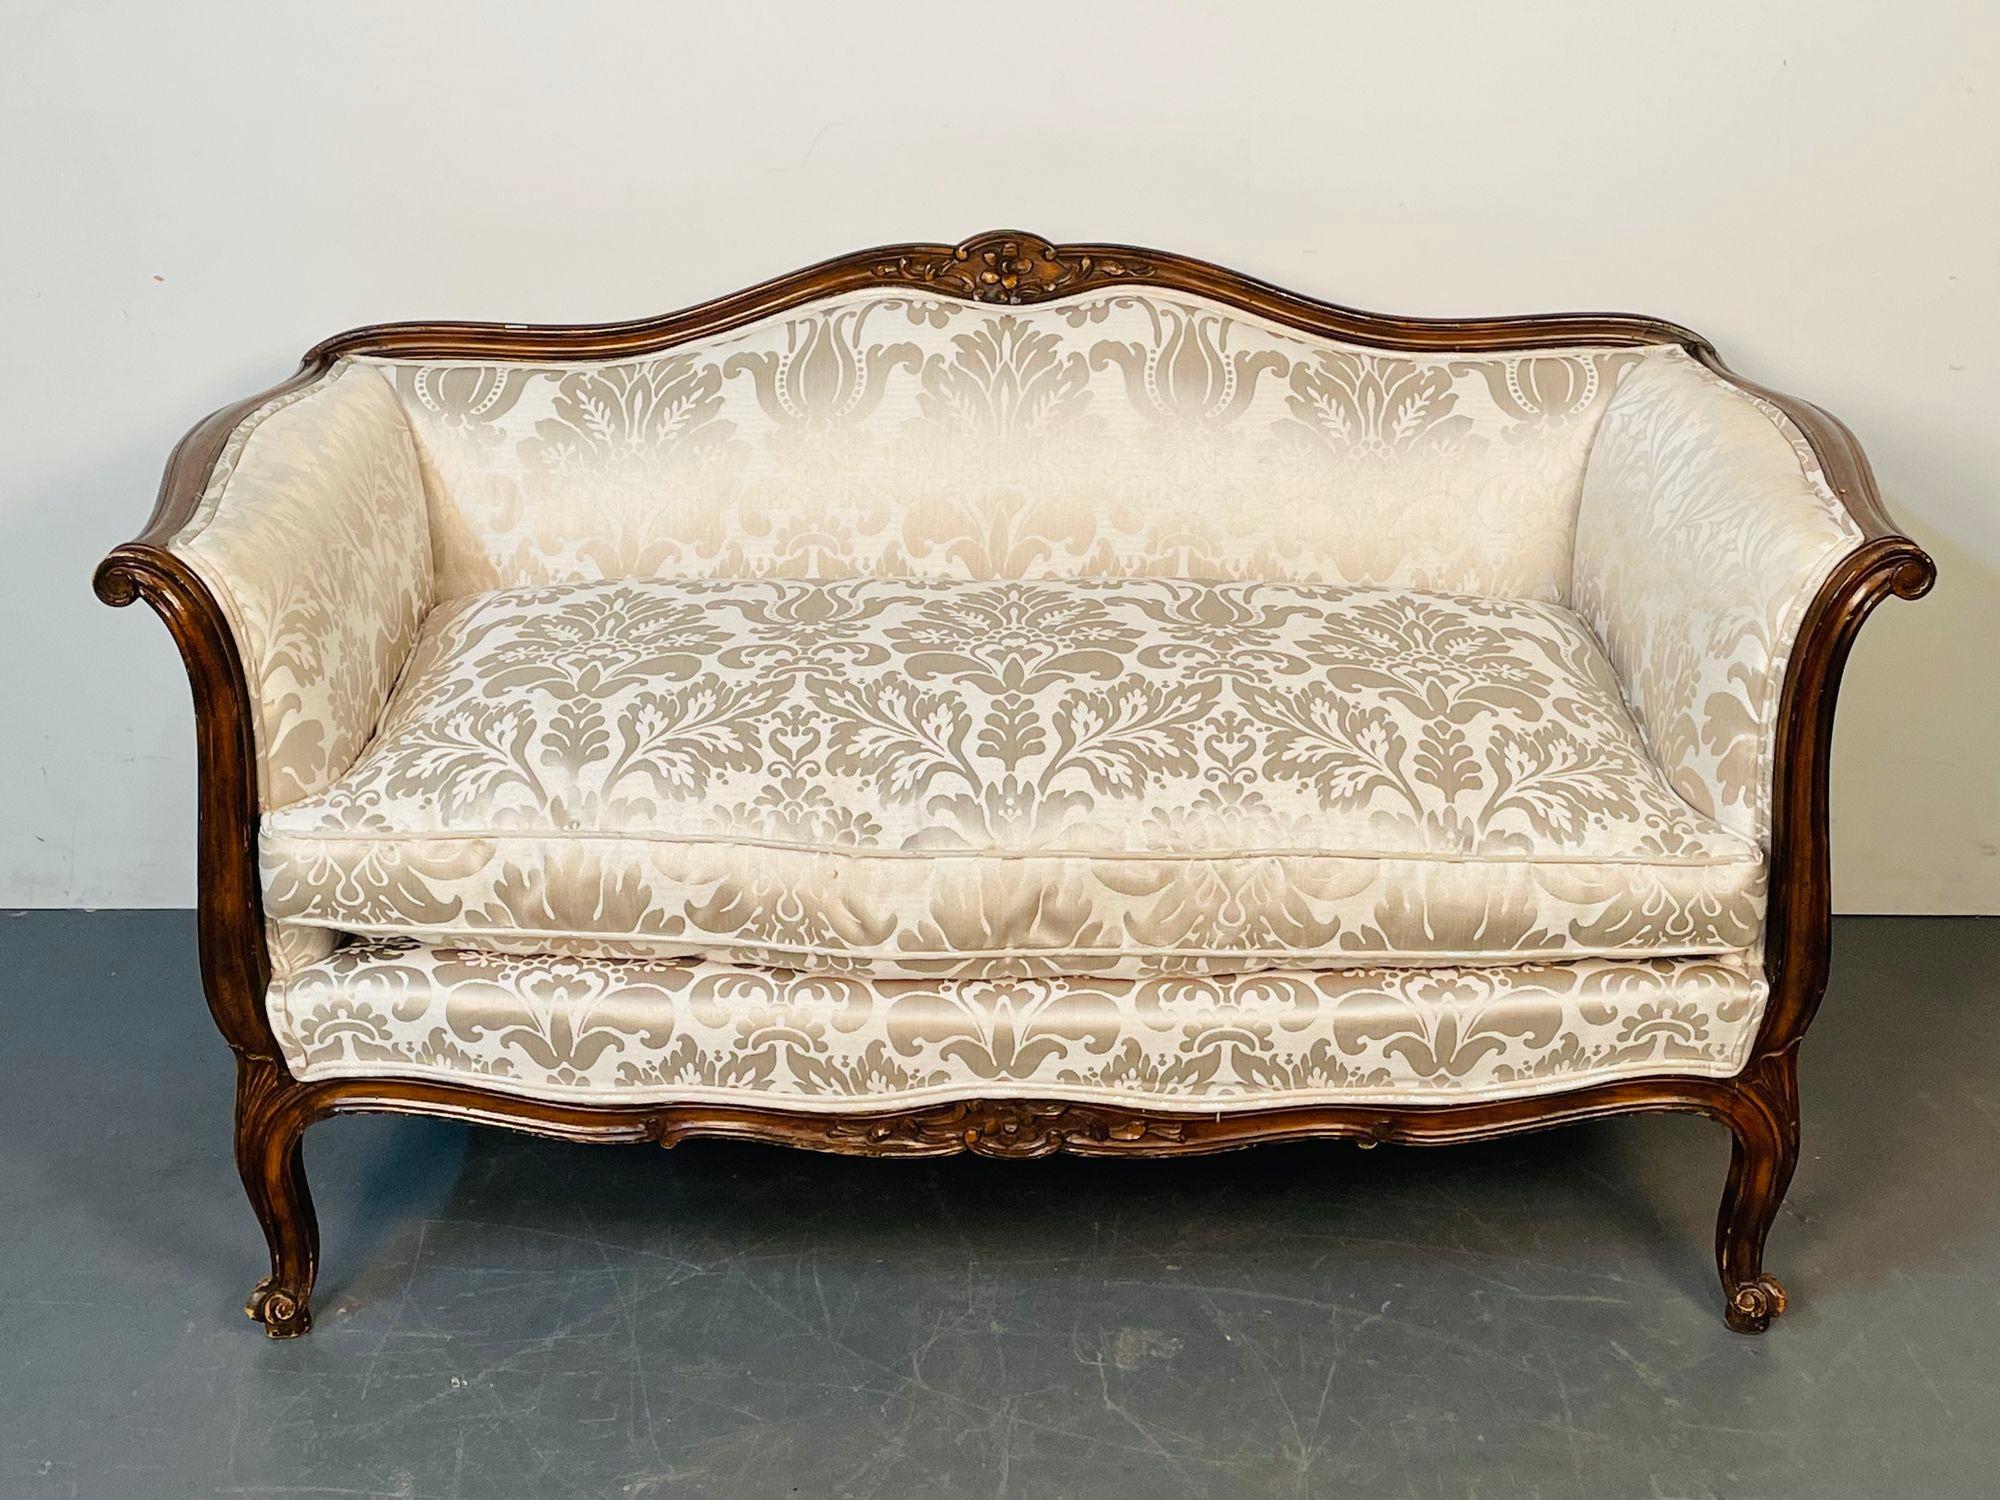 Small Louis XV Mahogany Carved Settee / Sofa, Floral Silk Upholstery

A simply stunning Louis XV Style Canape or Settee having a walnut solid wood frame circa 1940 recently recovered in a Lee Silk upholstery. Strong and Sturdy.
H30 L54 D29 SH18.5